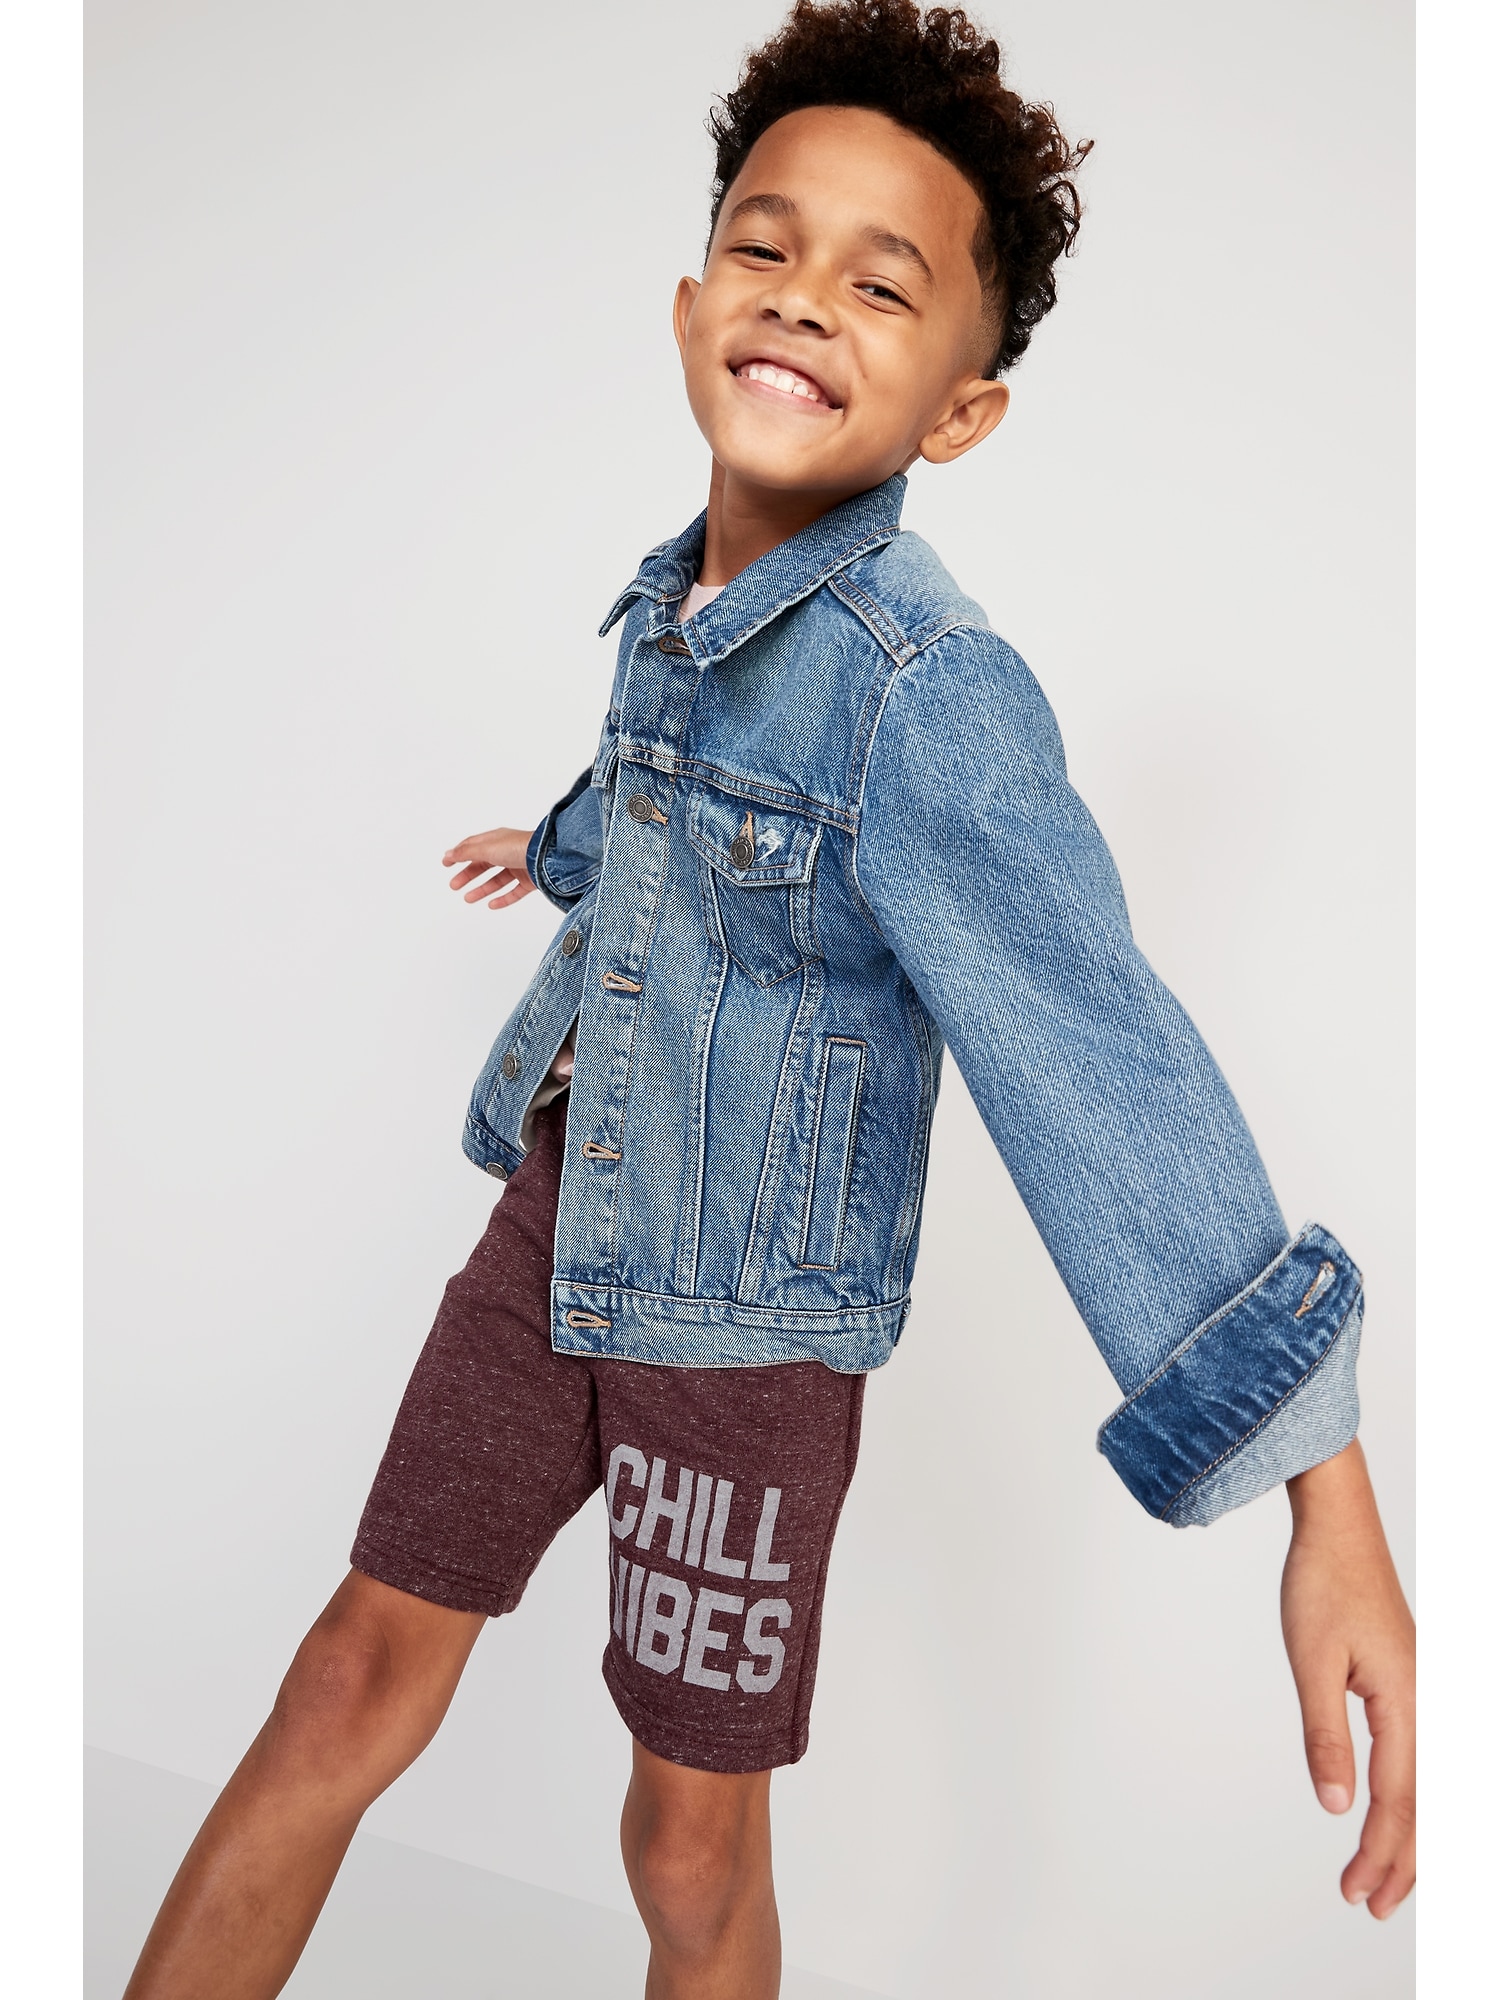 Flat-Front Fleece Jogger Shorts for Boys | Old Navy